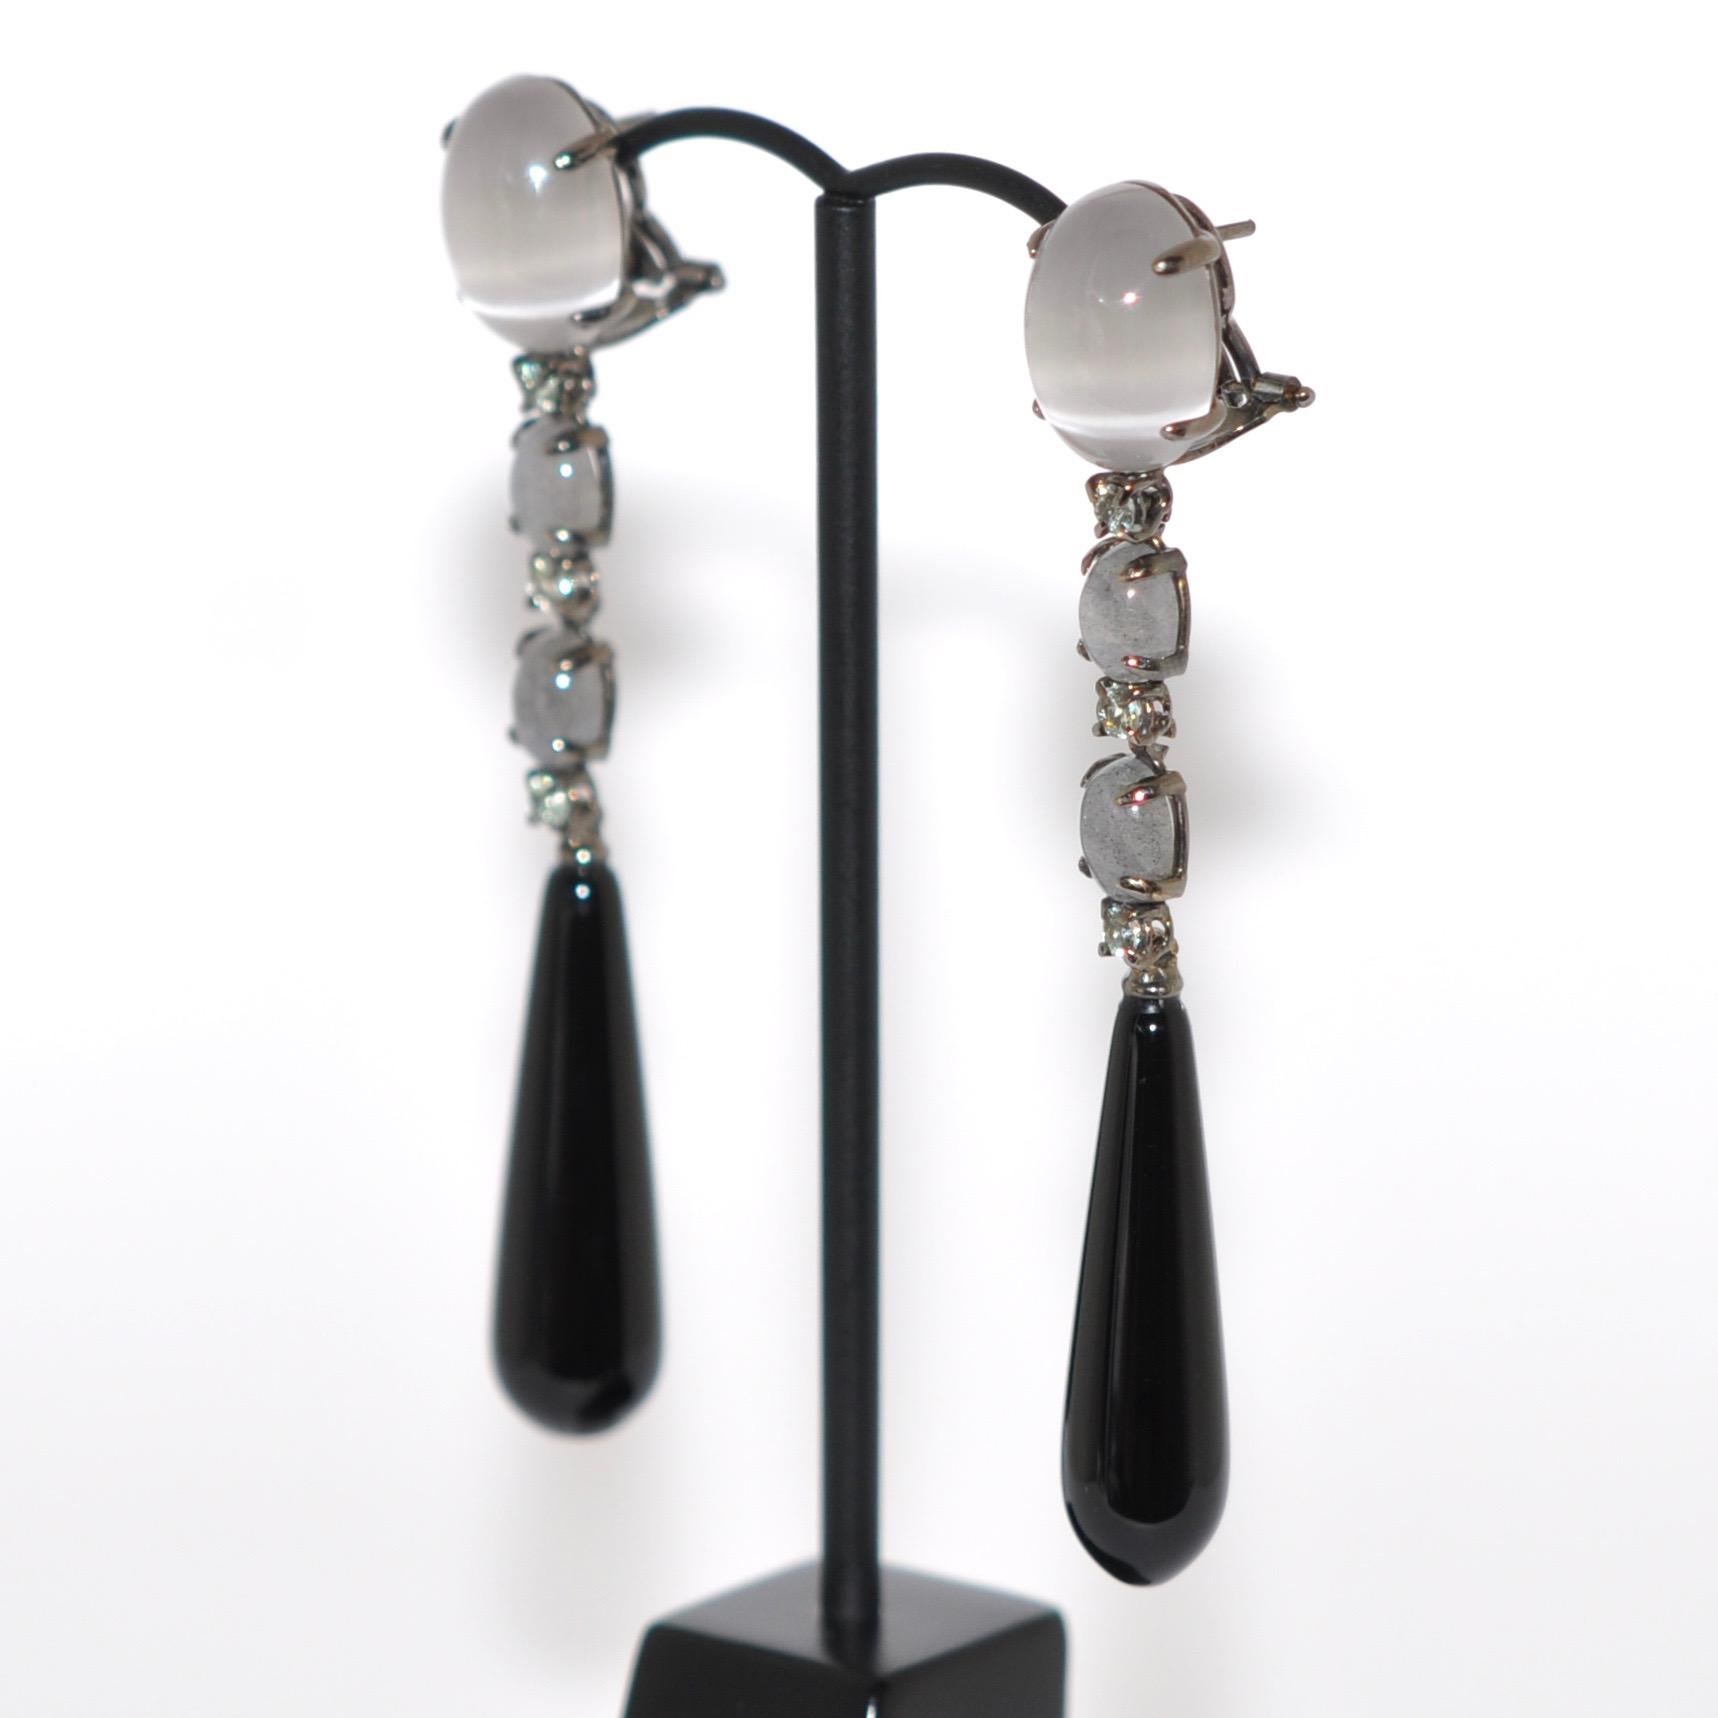 Discover these magnificent chandelier earrings in Agate, Labradorite and white Diamonds on an exquisite 18-carat black gold backing. These refined jewels embody elegance and opulence, with materials carefully selected for their beauty and